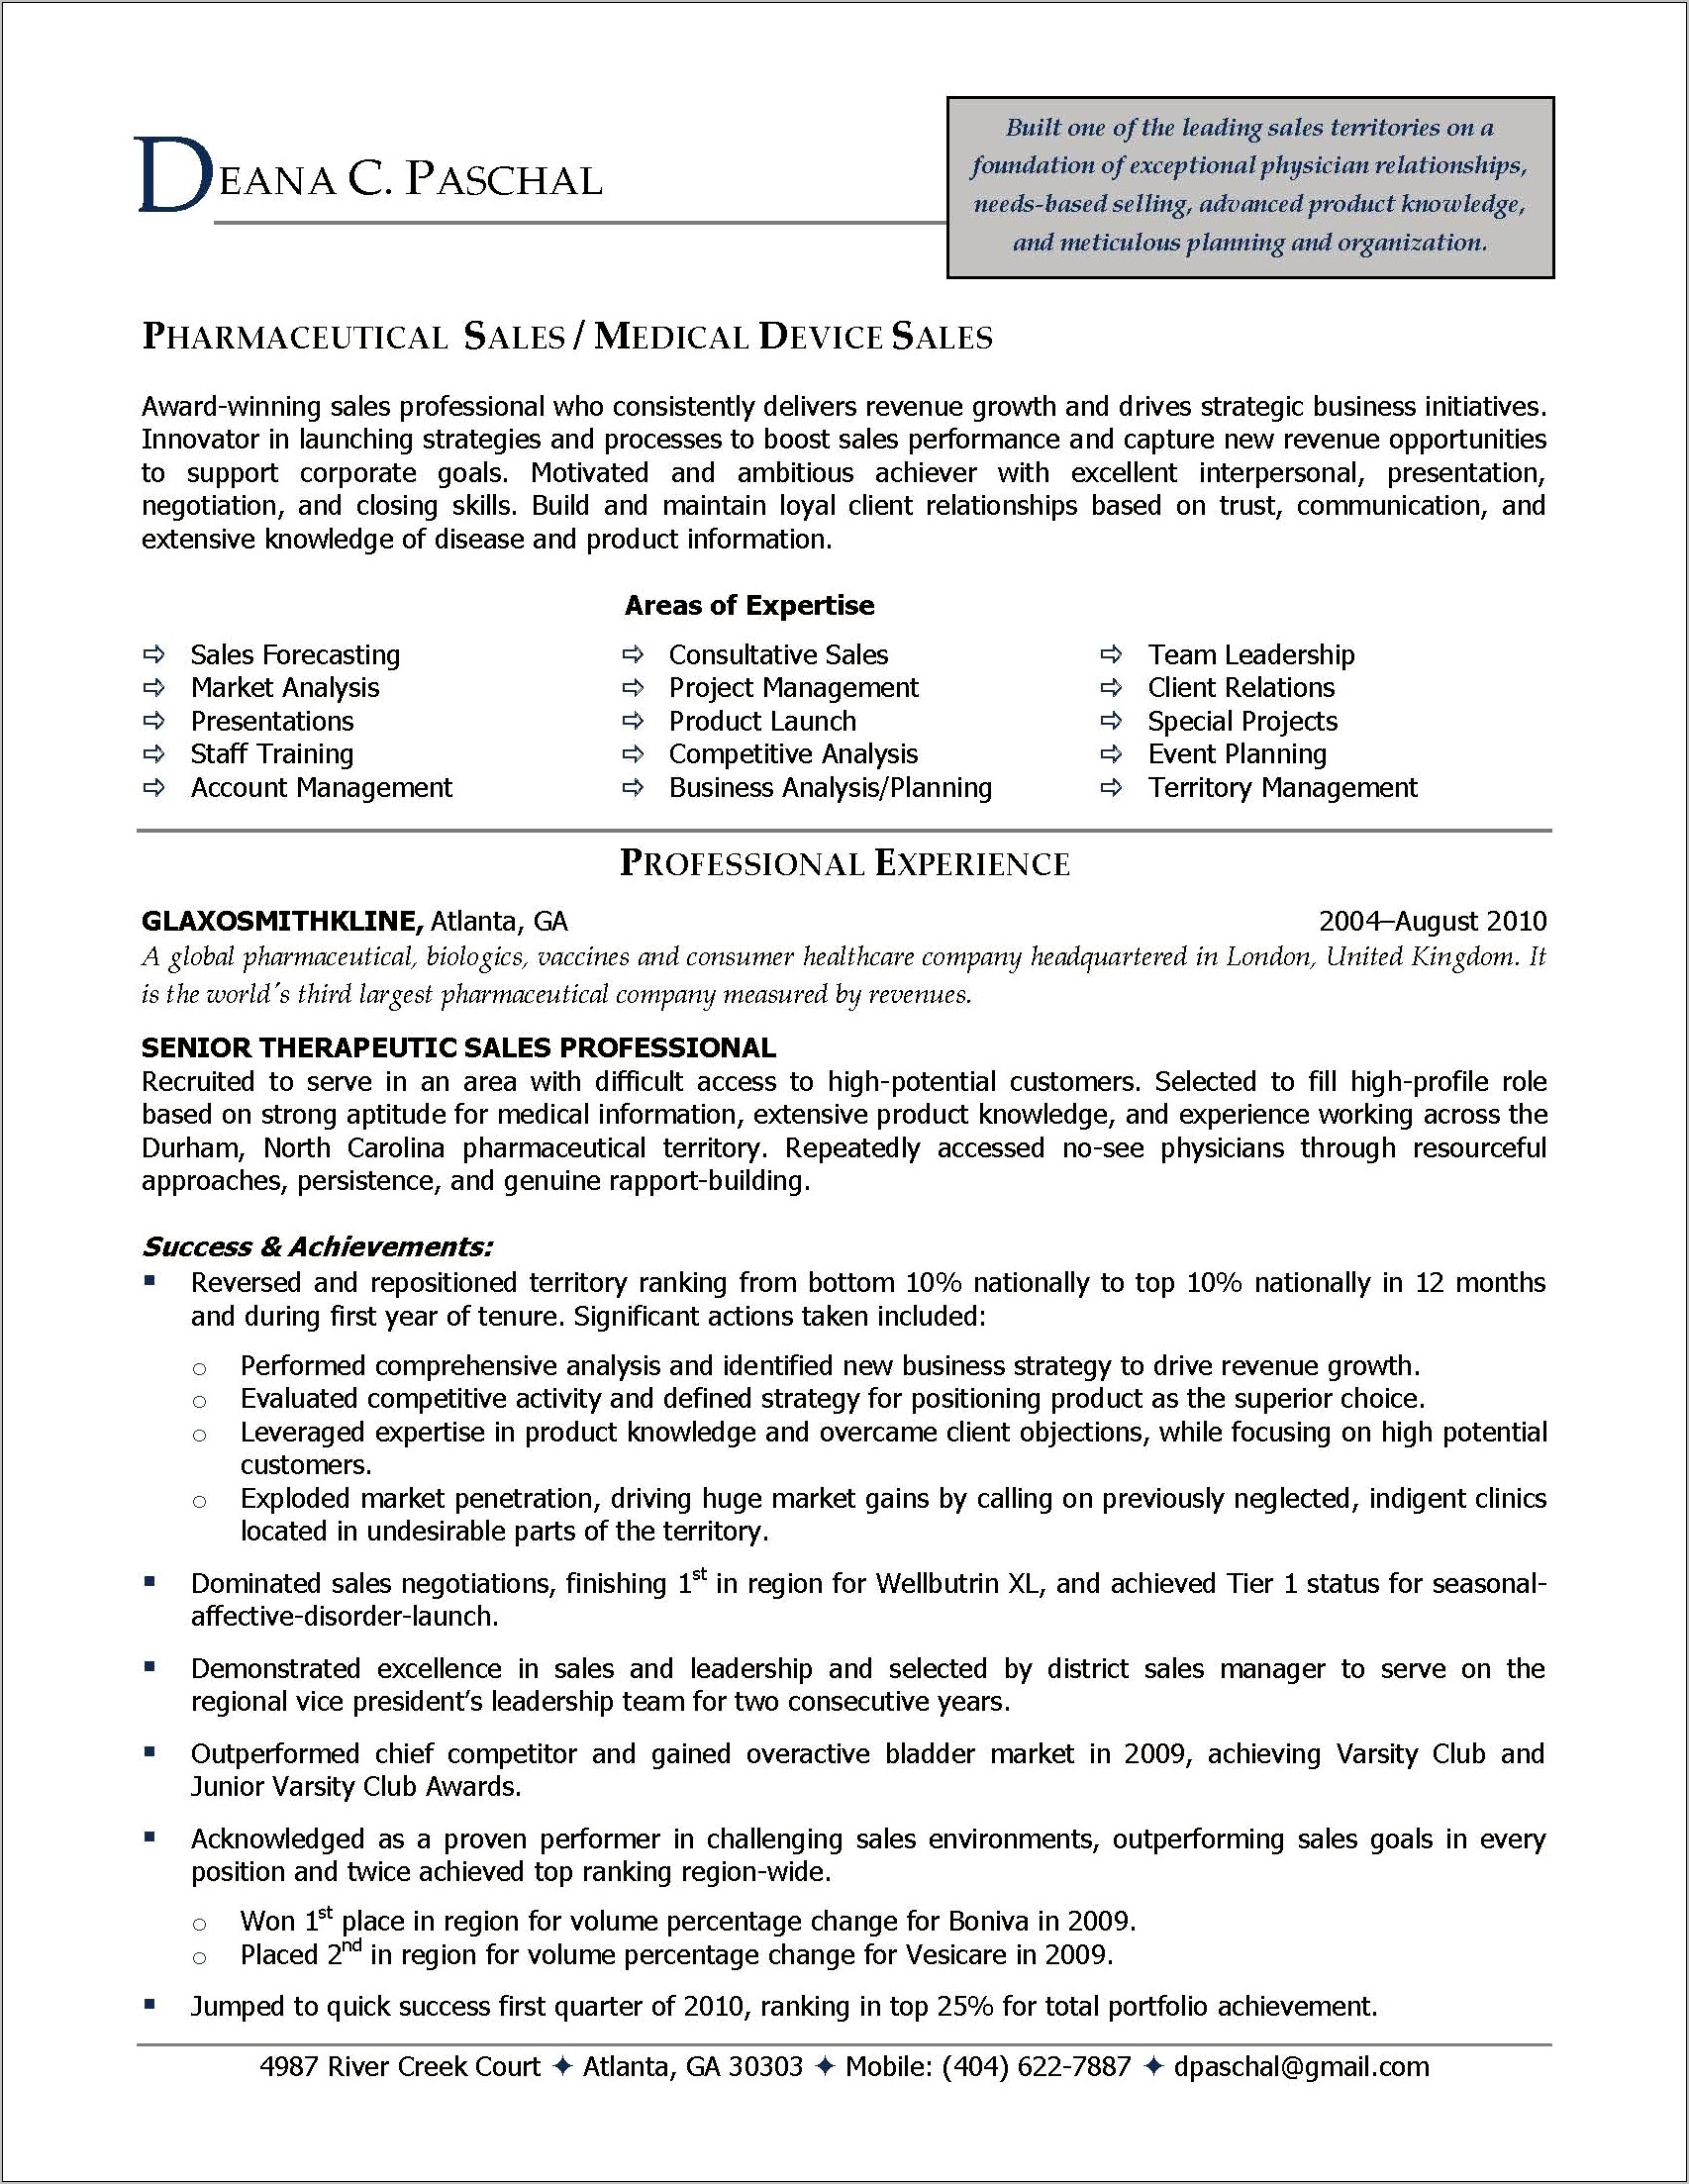 Pharmaceutical Resume Samples For Quality Control